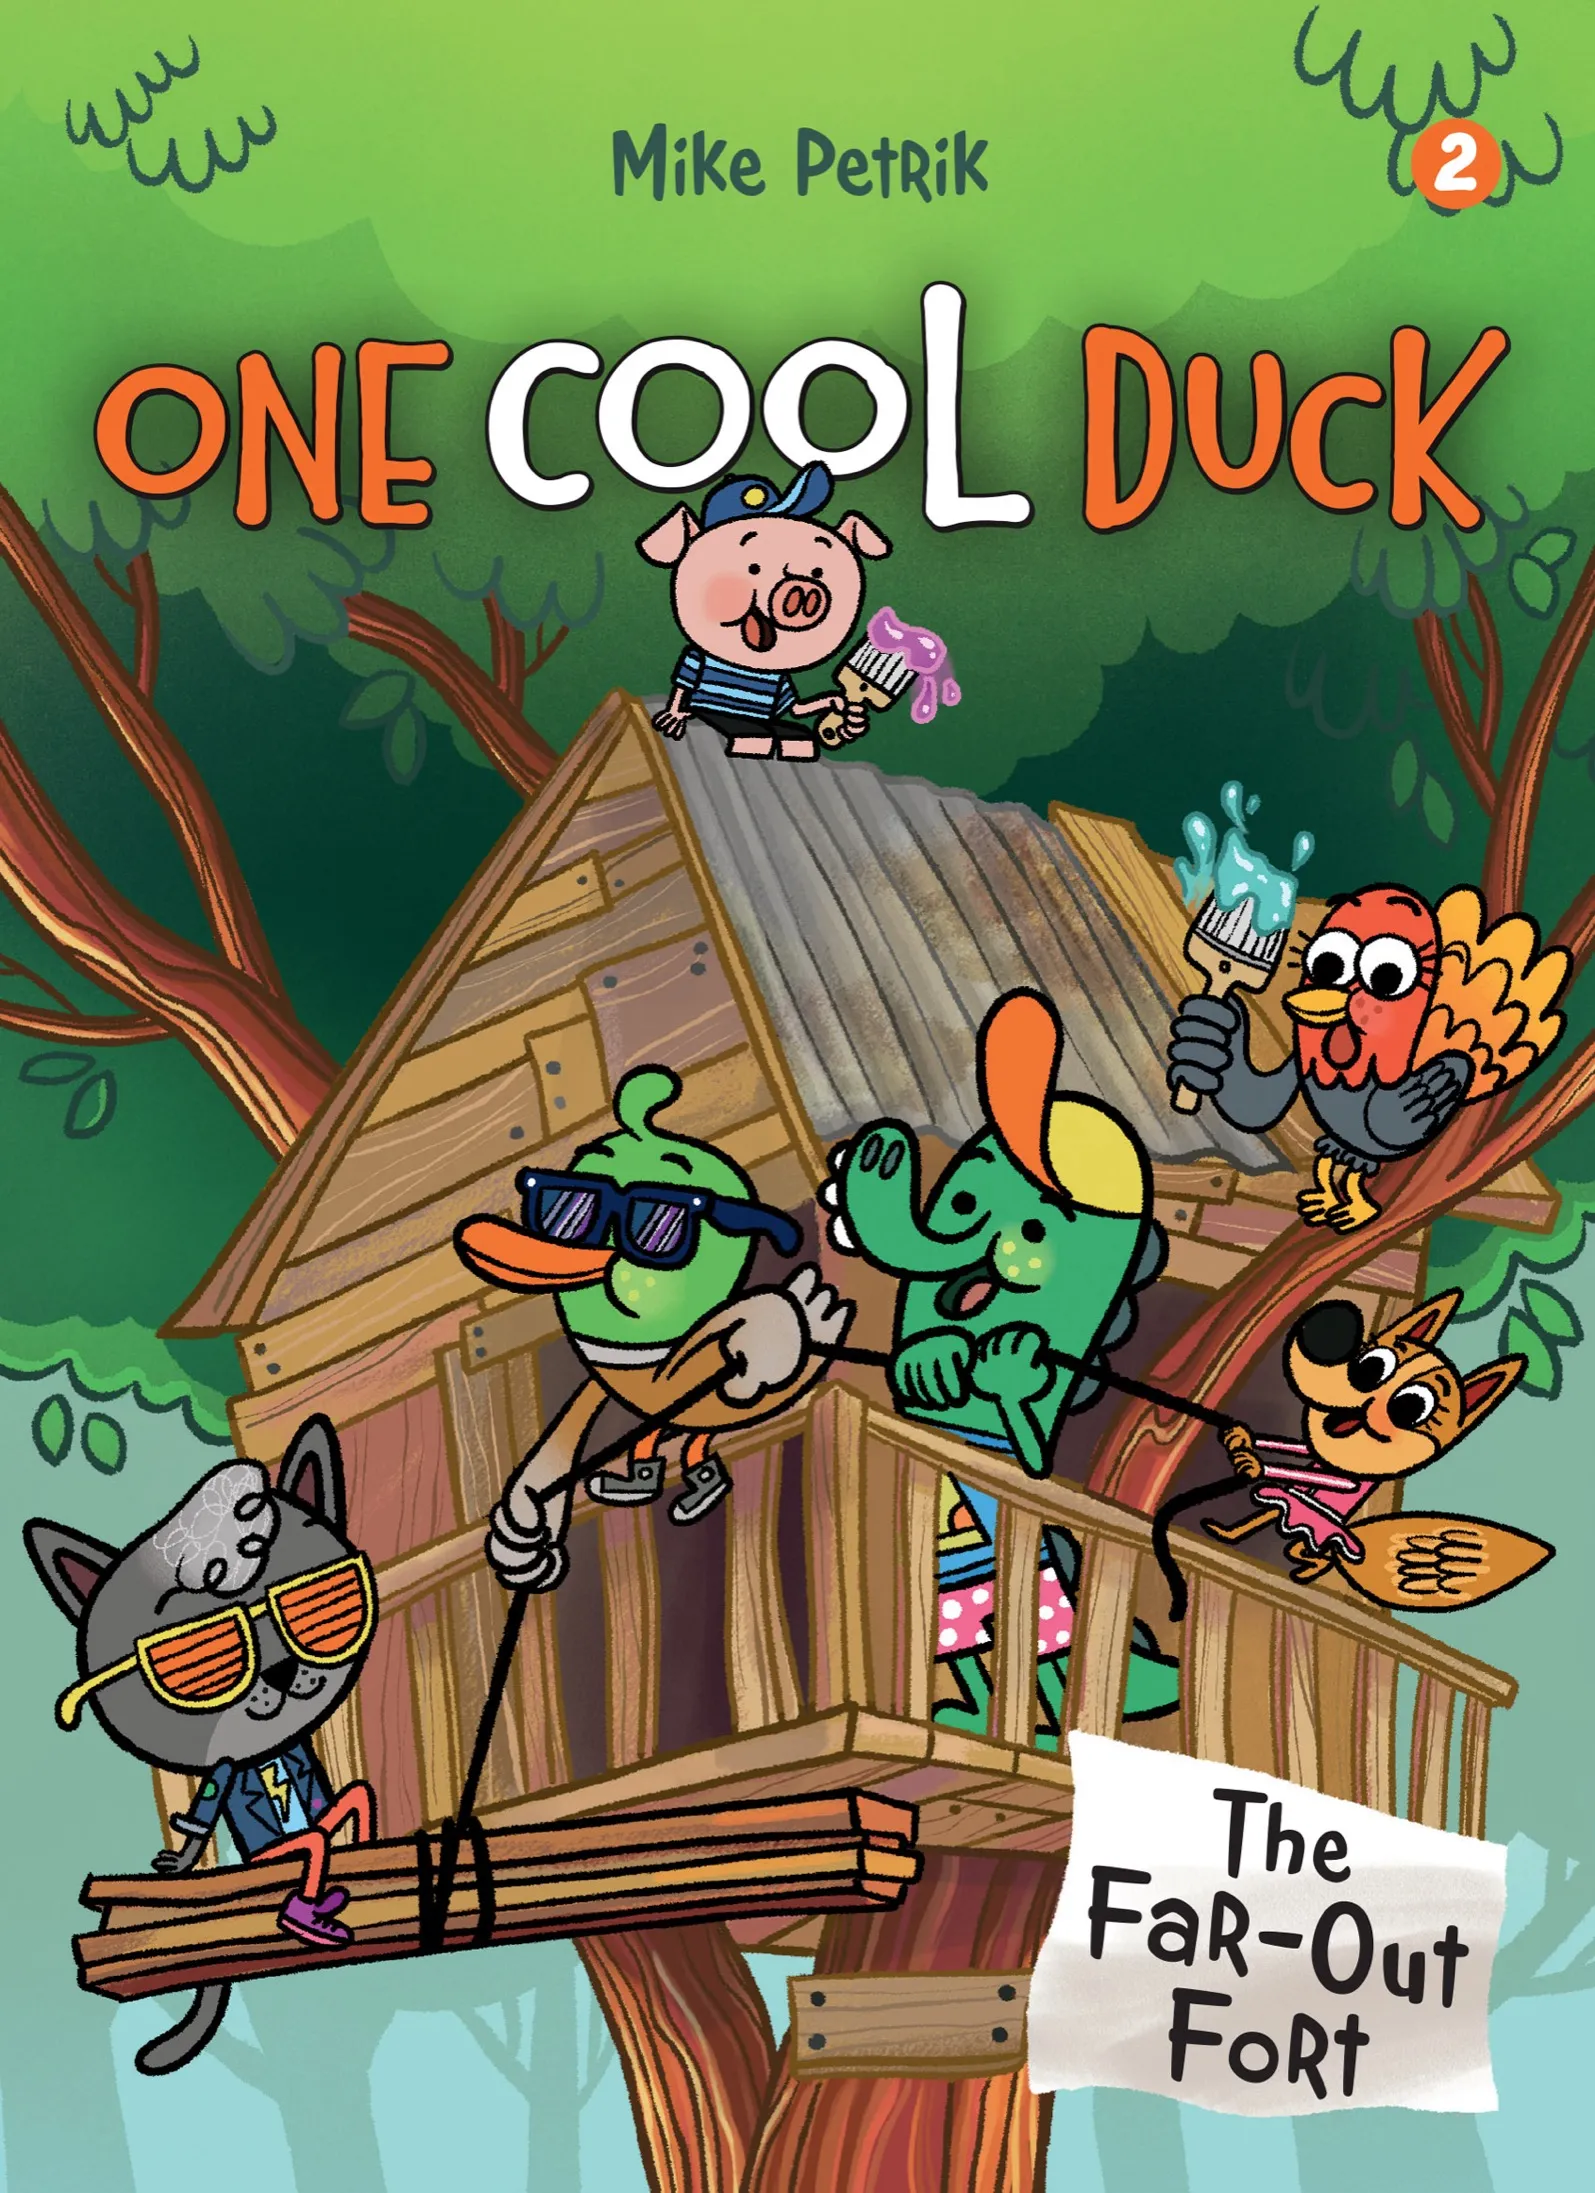 The Far-Out Fort (One Cool Duck #3)